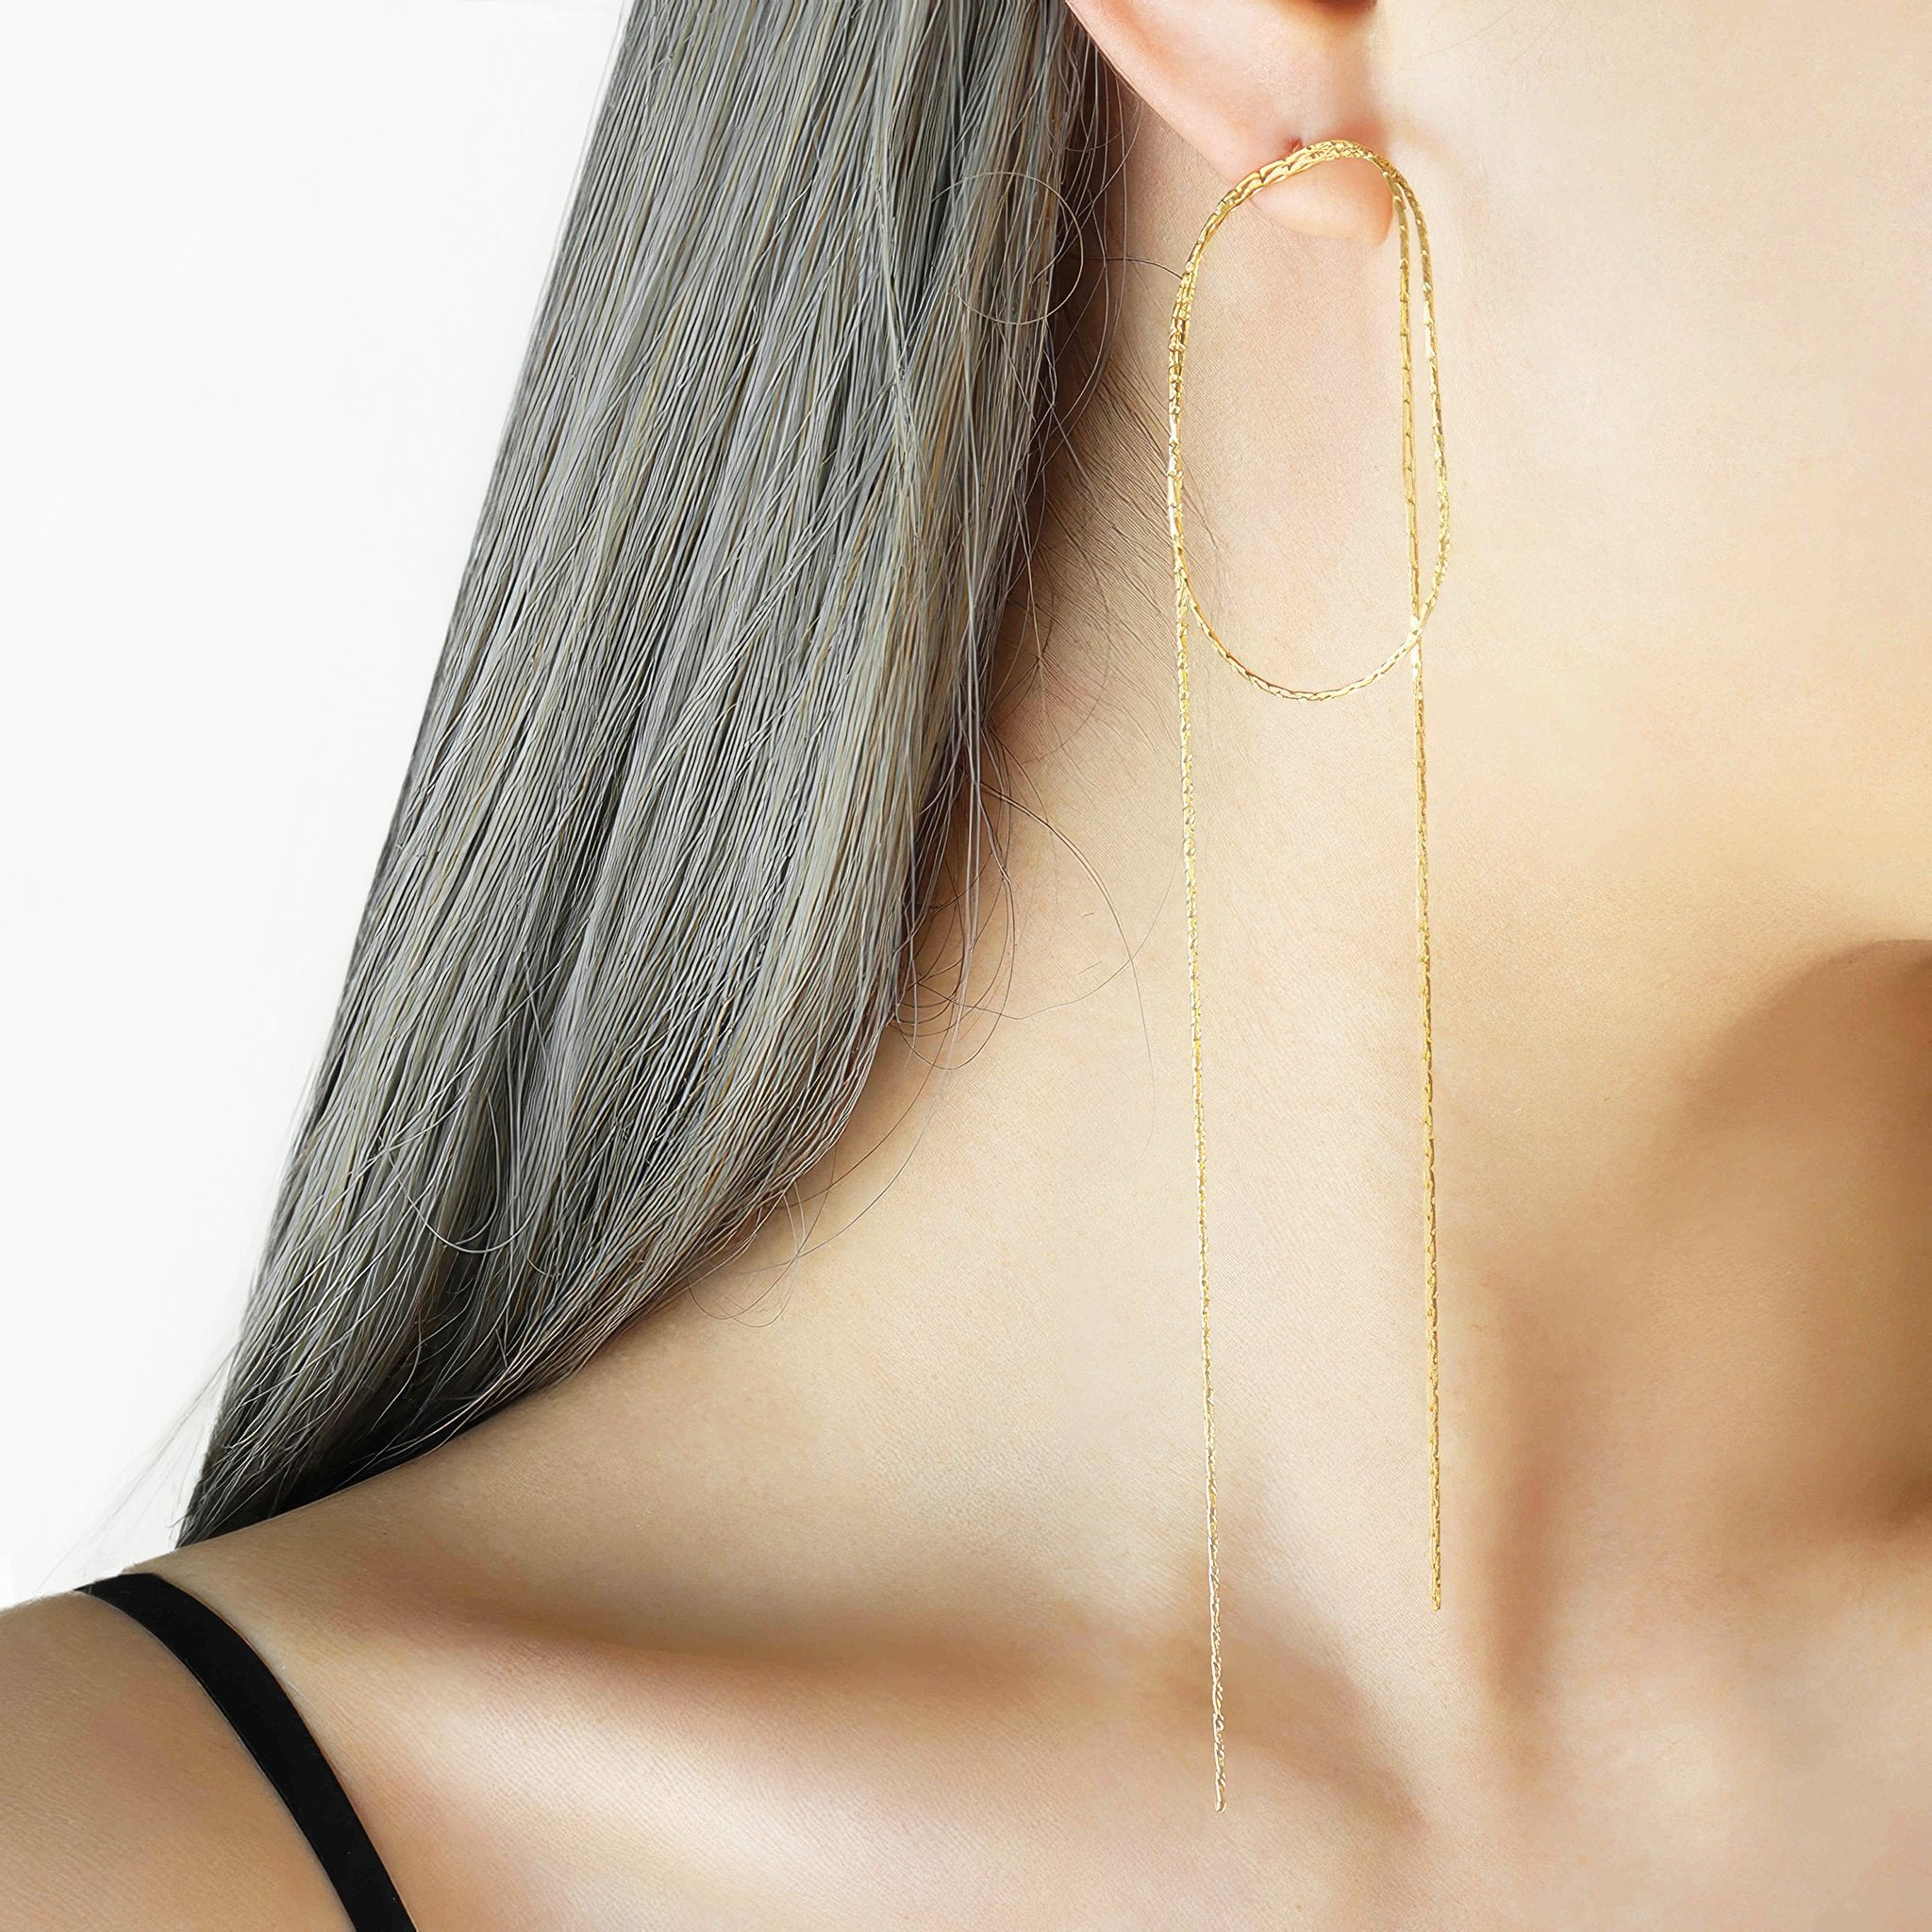 Long Chain Tassel Earrings - Nobbier - Earring - 18K Gold And Titanium PVD Coated Jewelry